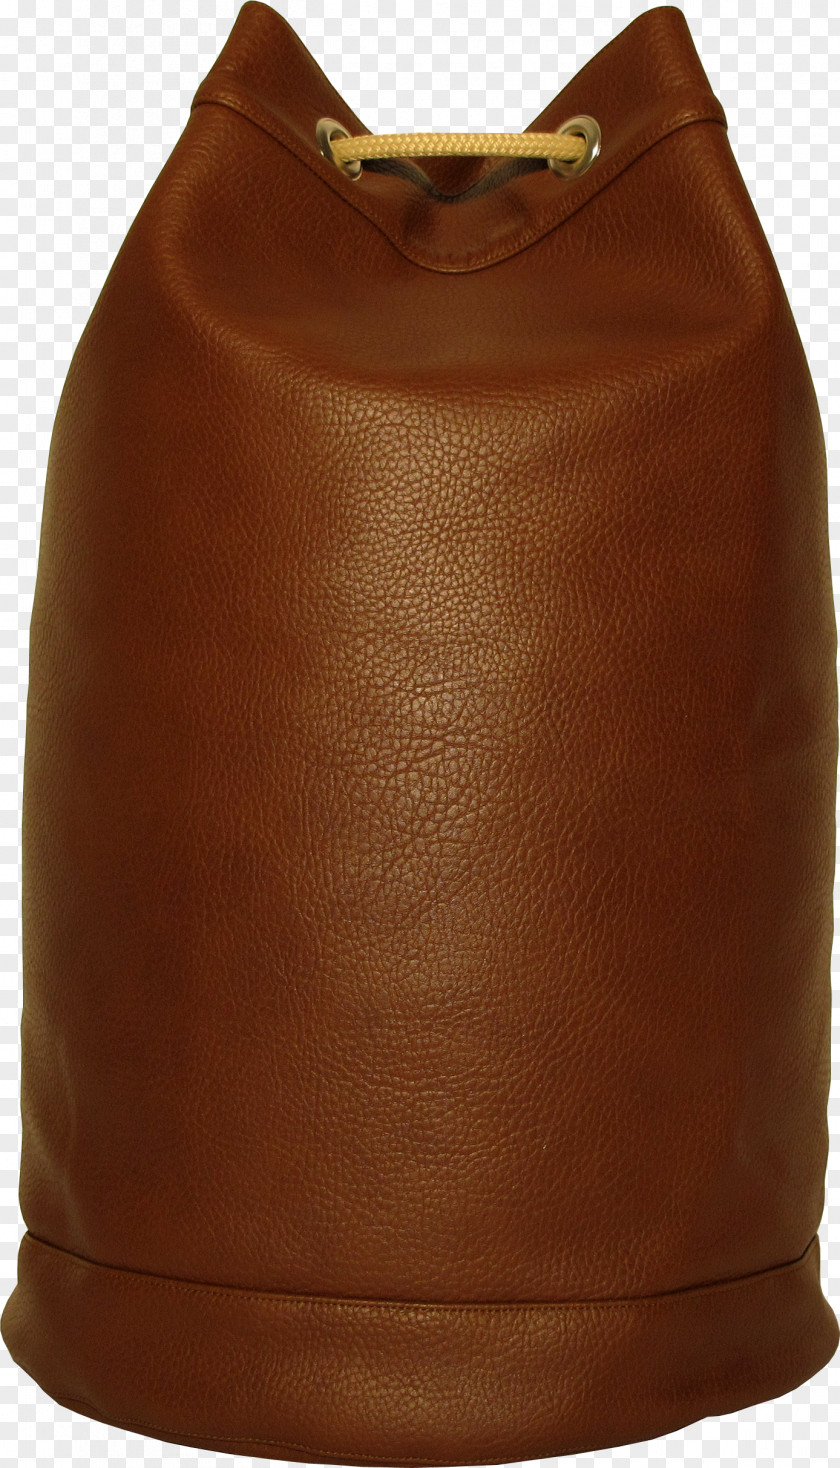 Retro Label Collection Bag Brown Leather PNG